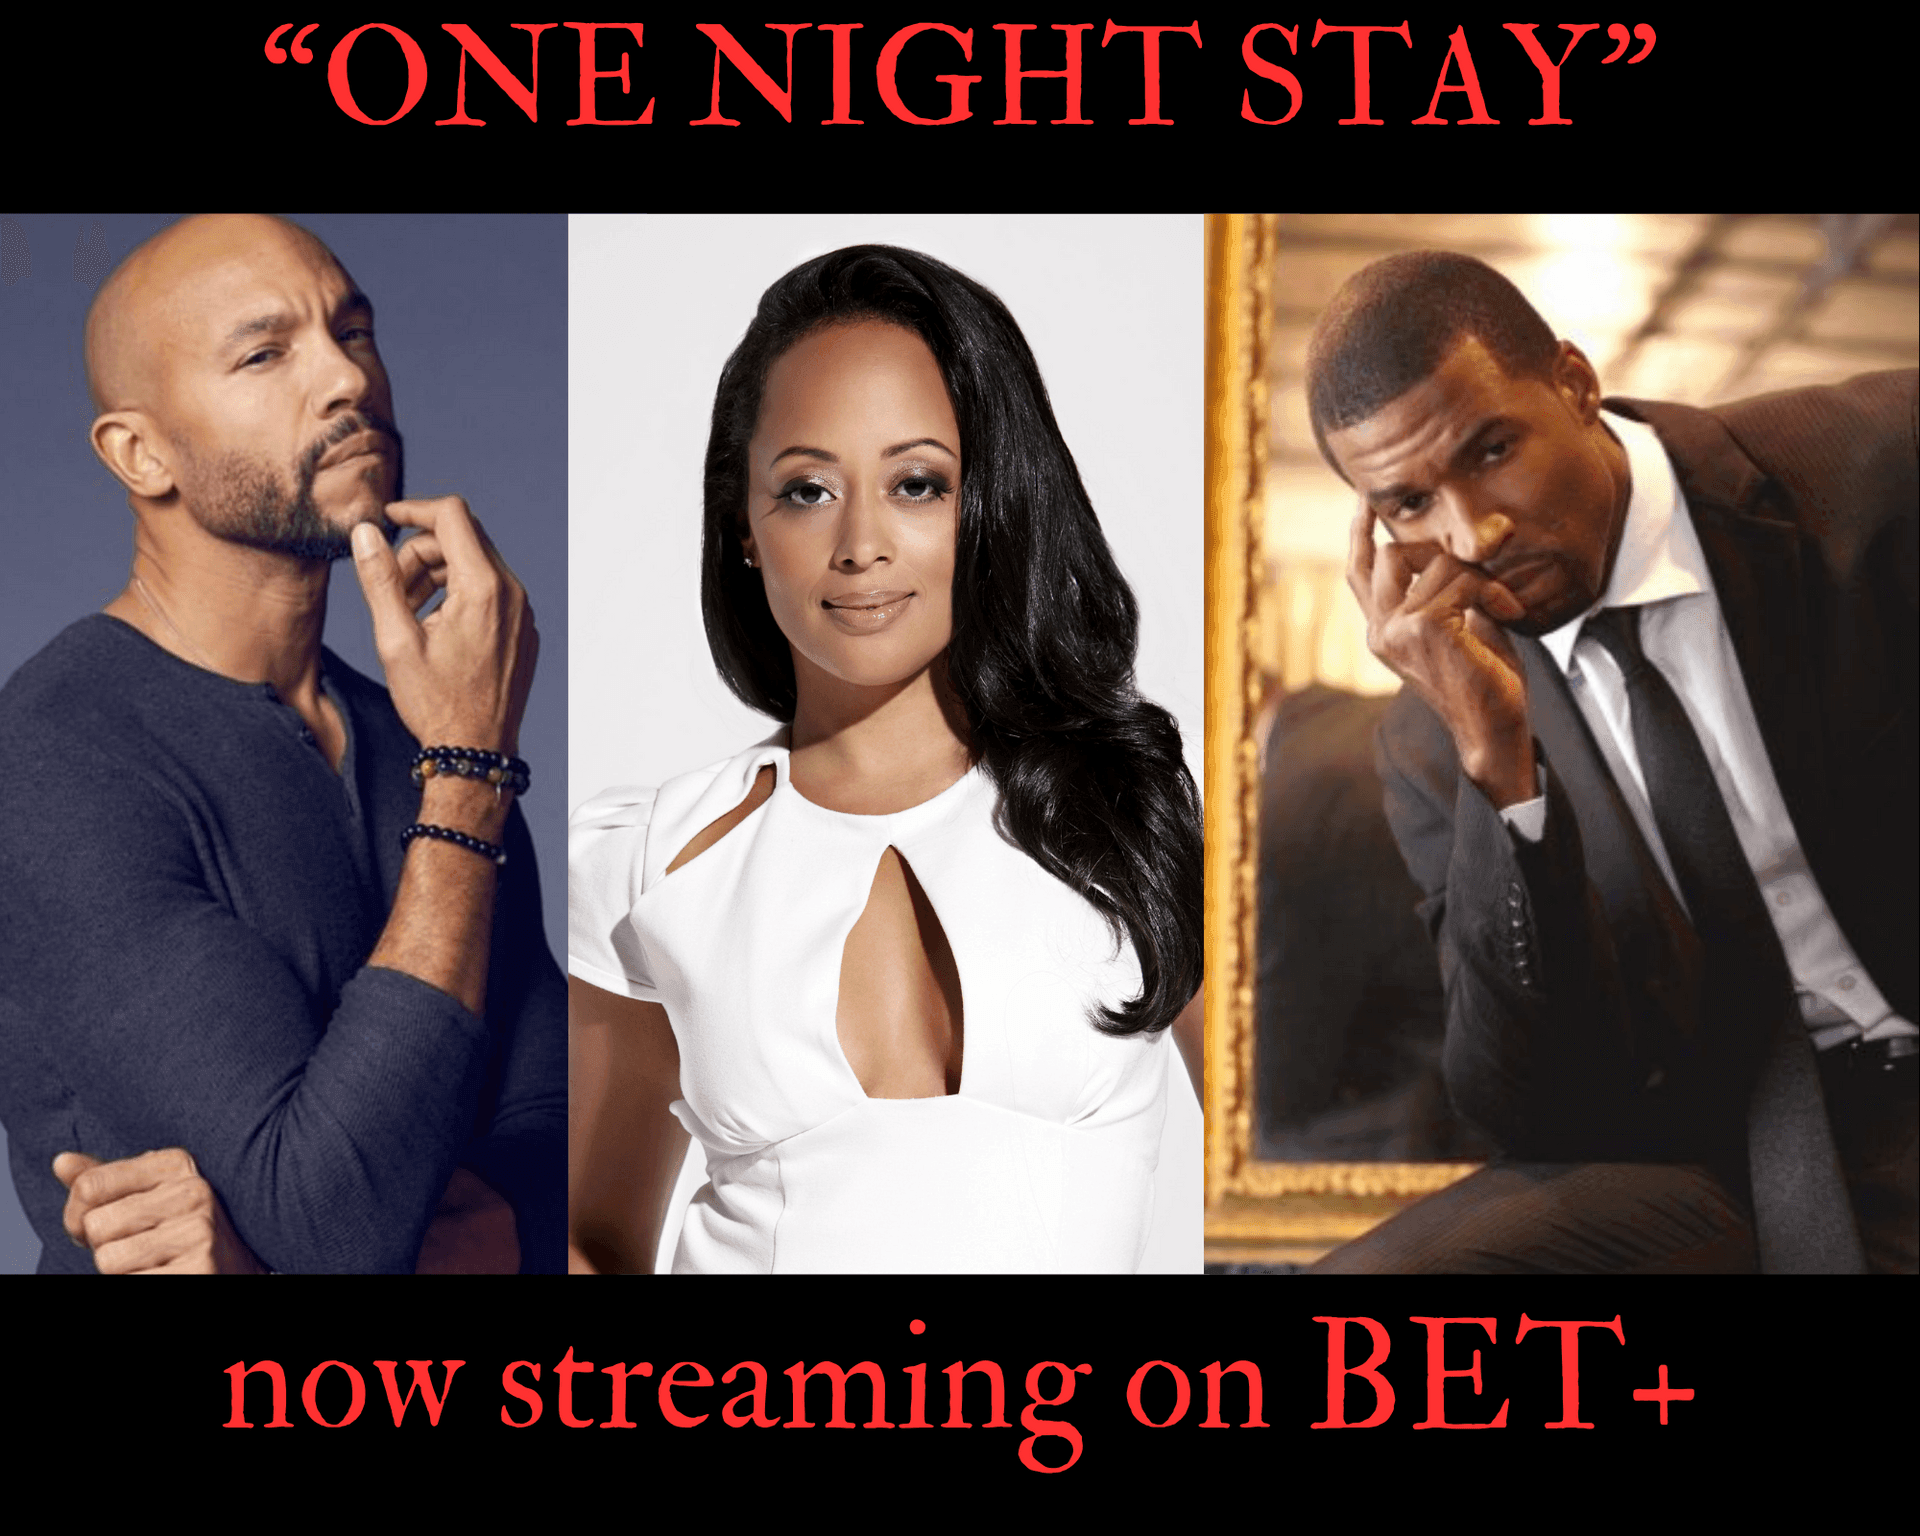 Behind the Scenes with Actors from "One Night Stay" on BET+